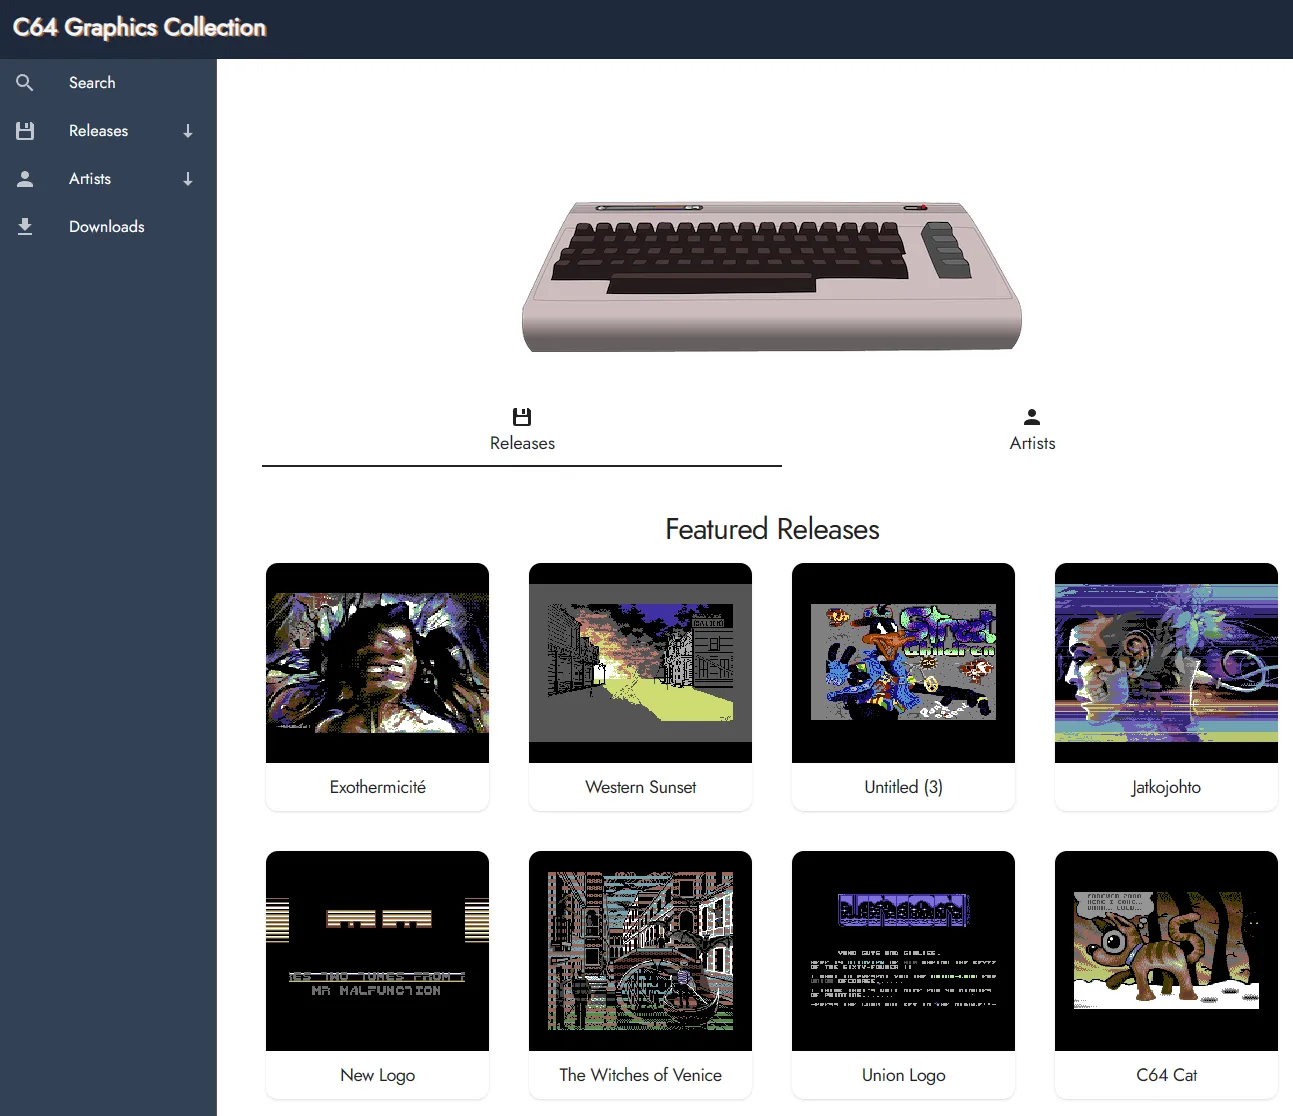 C64 Graphics Collection